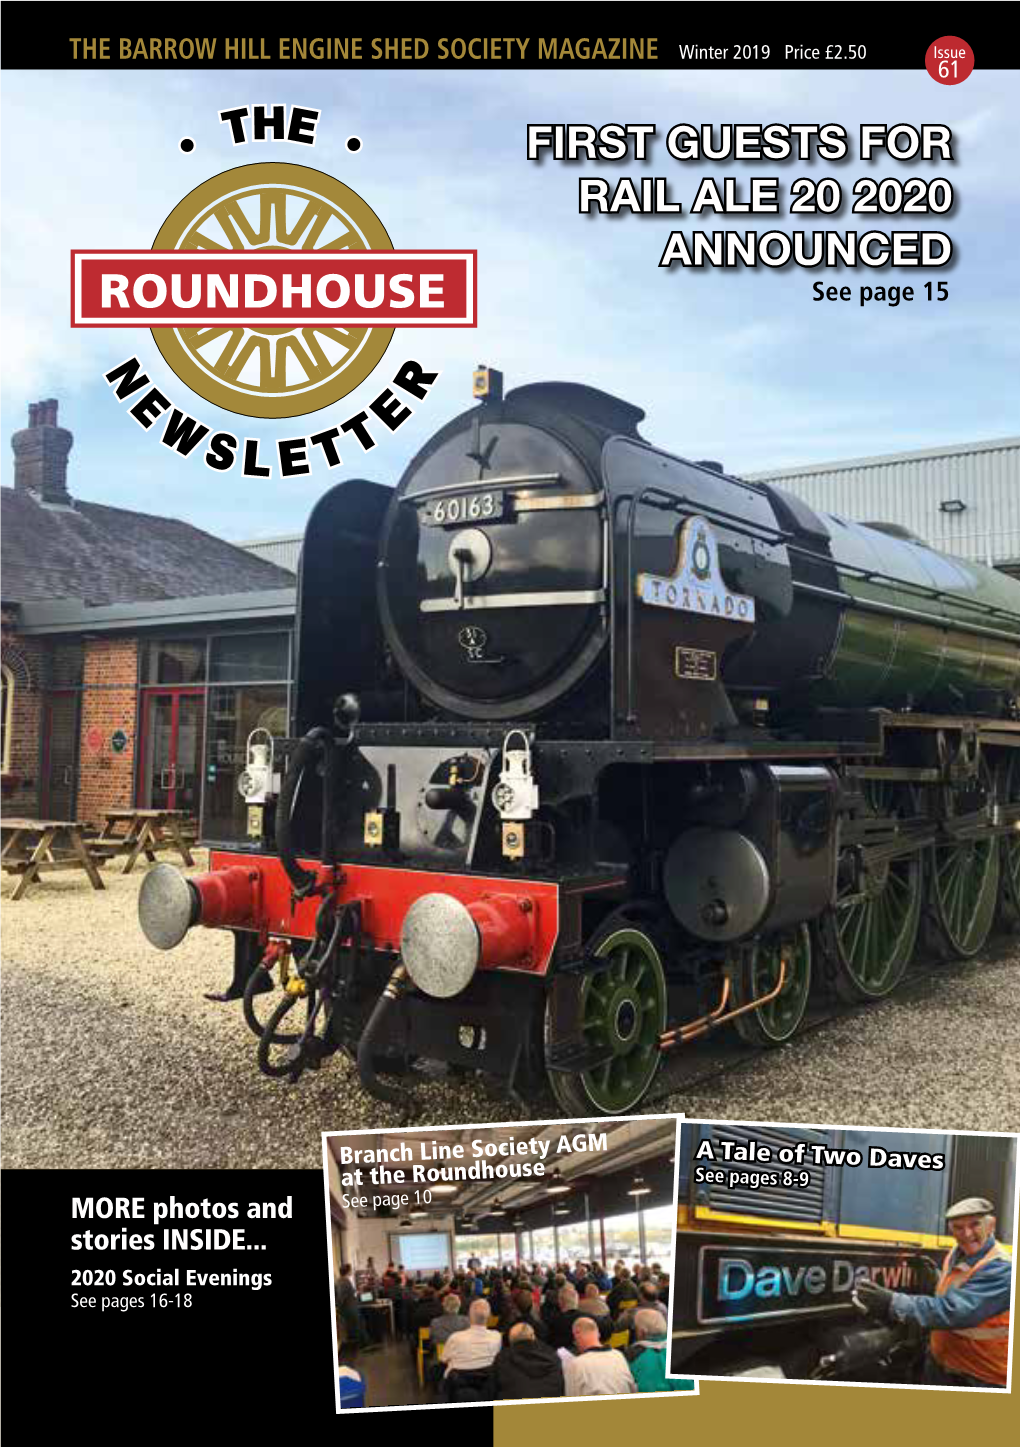 FIRST GUESTS for RAIL ALE 20 2020 ANNOUNCED See Page 15